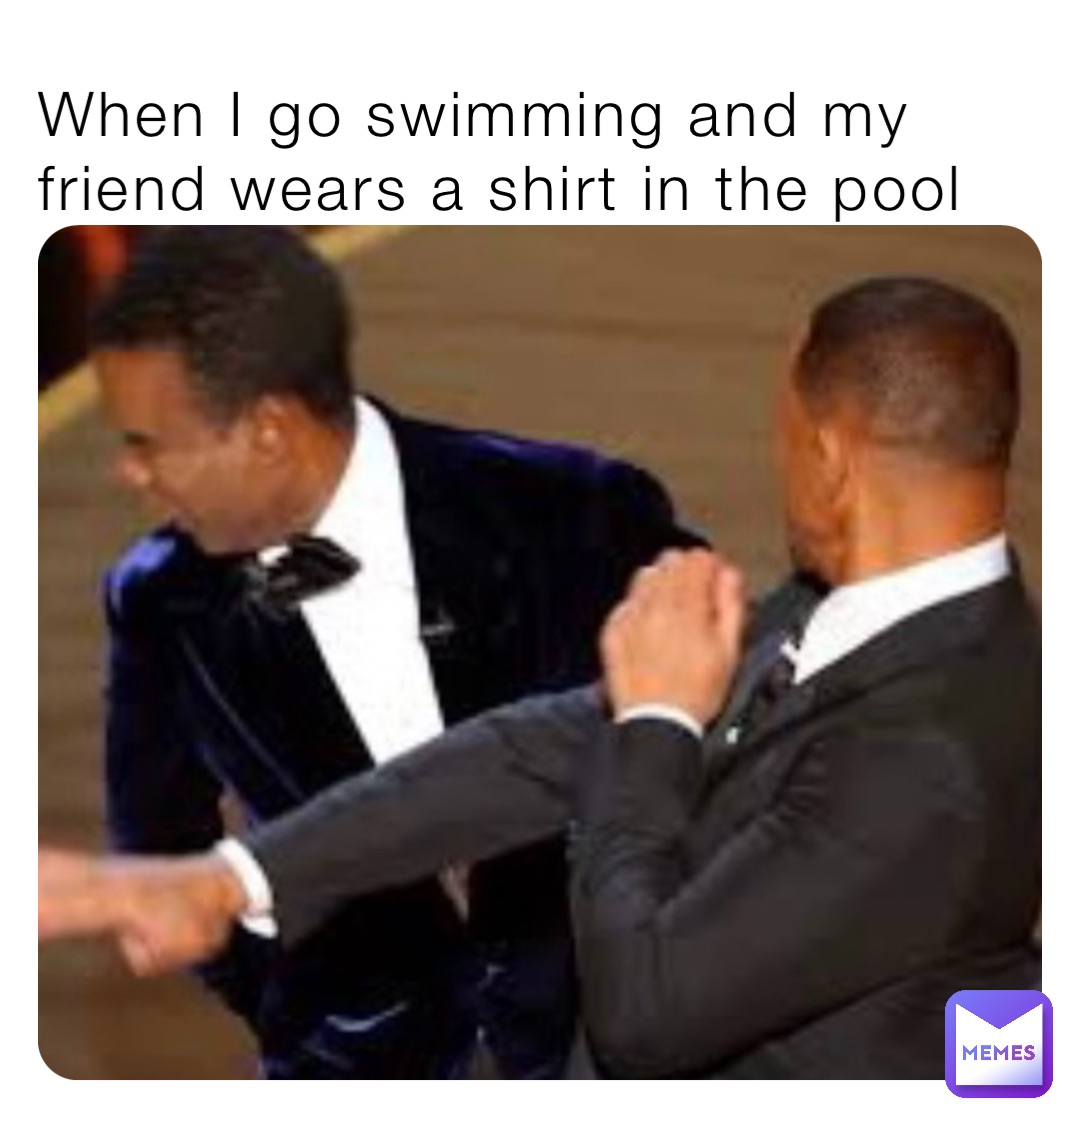 When I go swimming and my friend wears a shirt in the pool